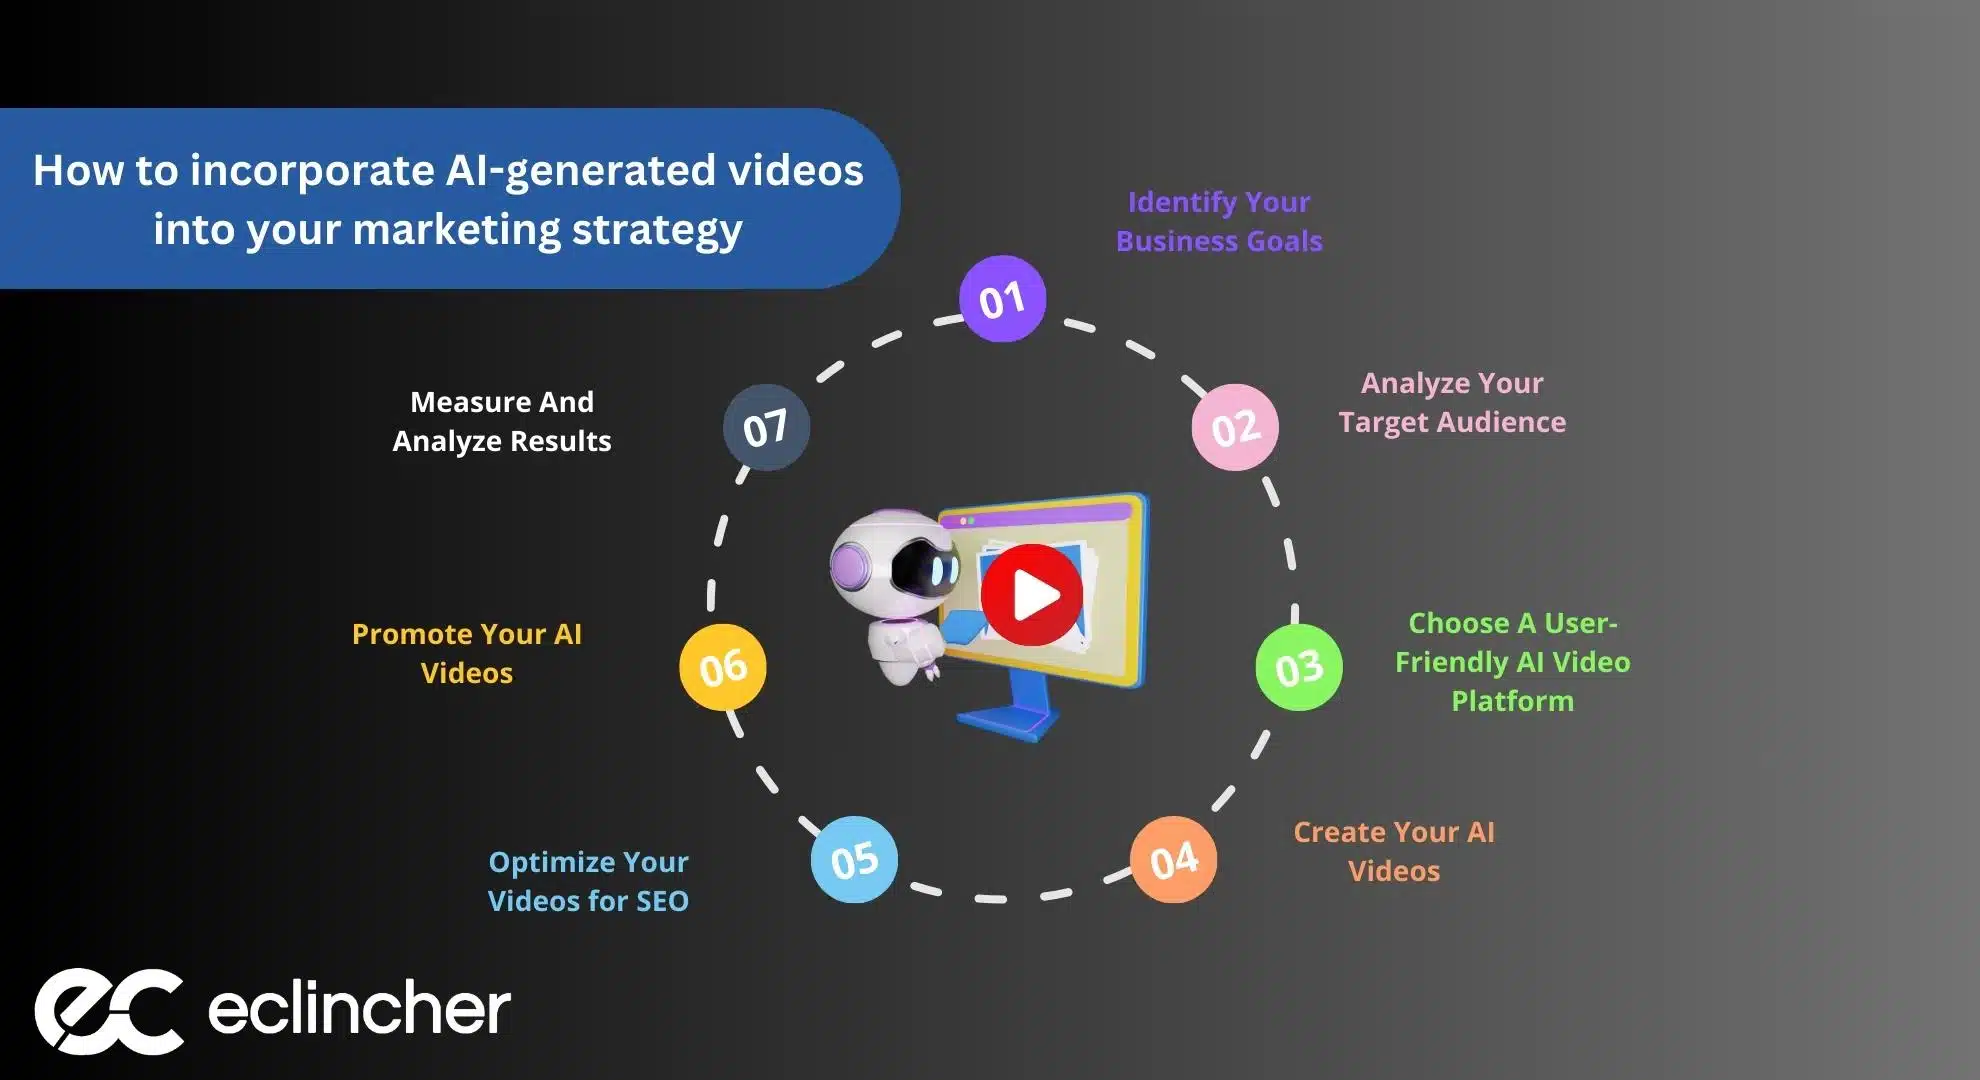 How to incorporate AI-generated videos into your marketing strategy